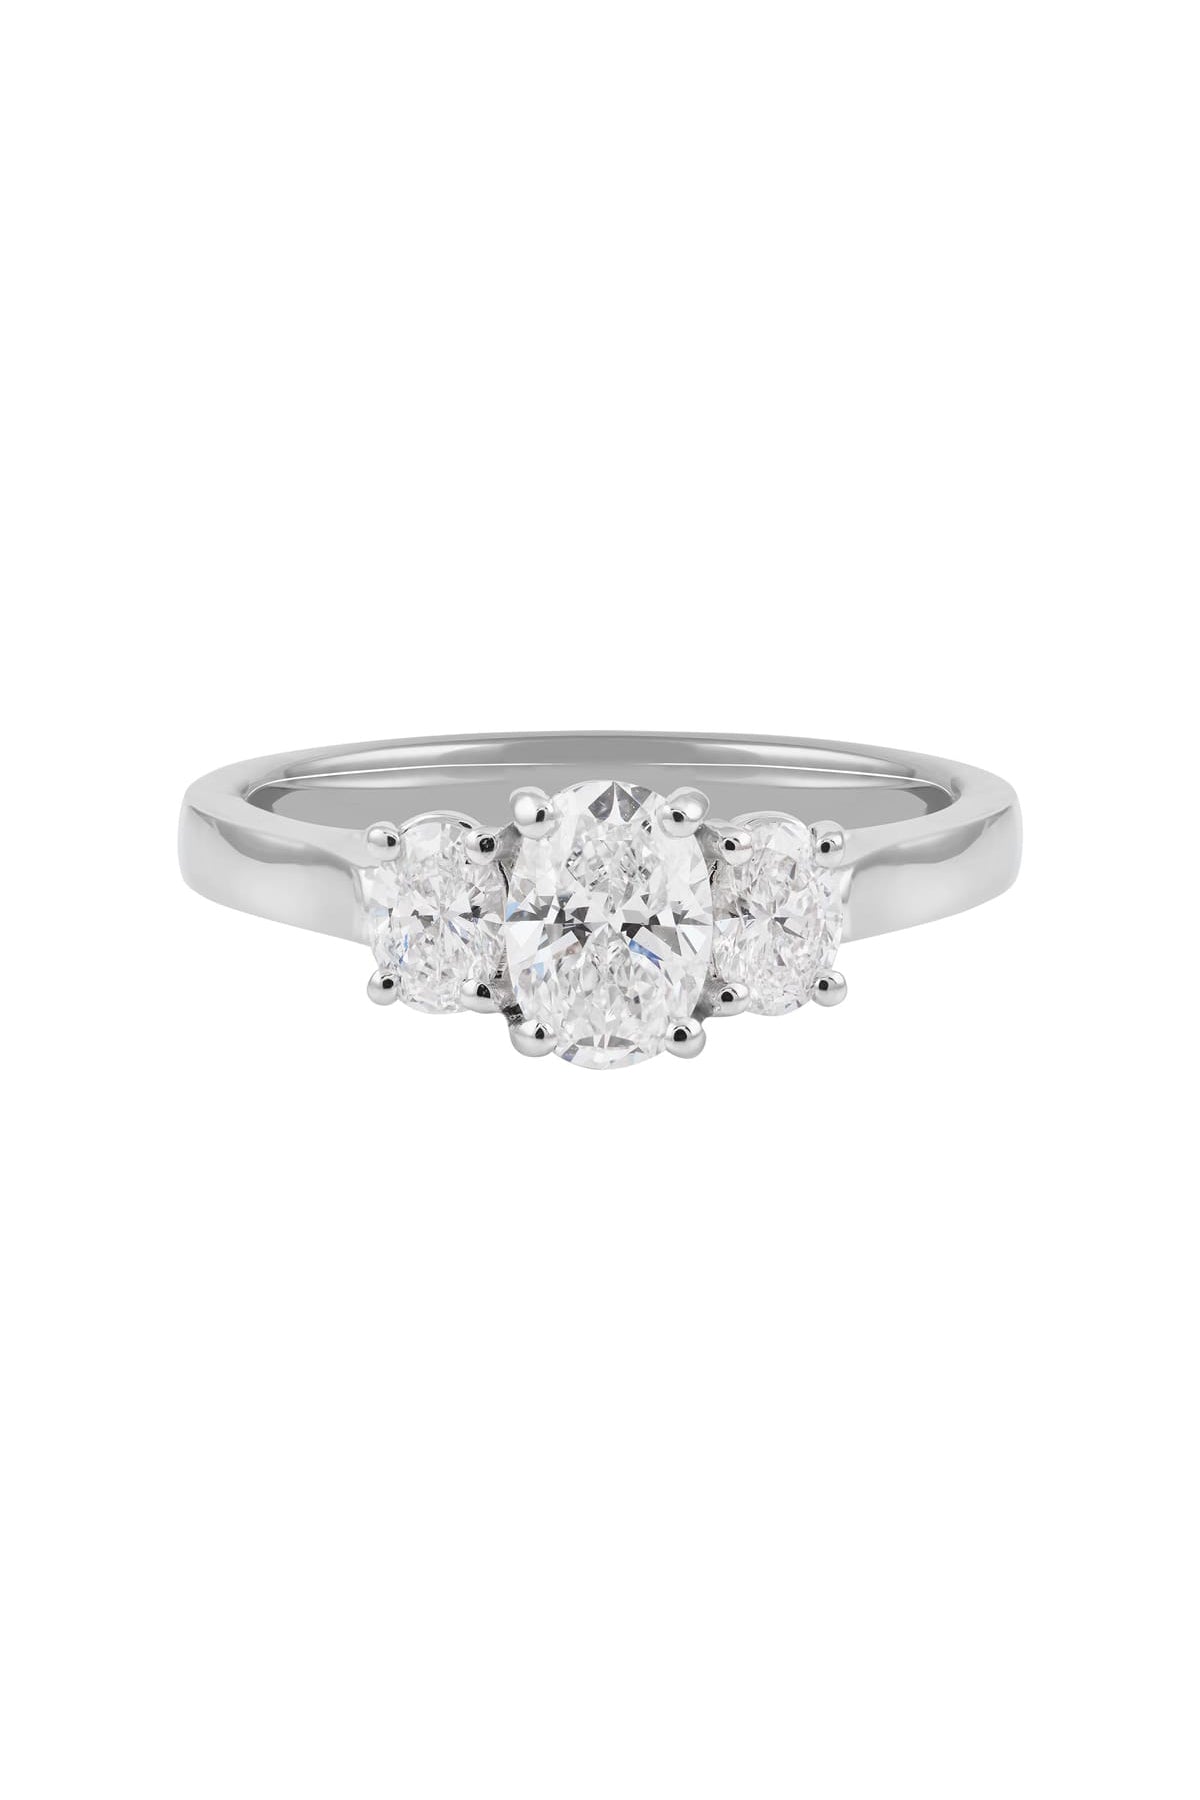 1.00ct Oval Diamond Ring set in 18ct White Gold available at LeGassick Diamonds and Jewellery Gold Coast, Australia.